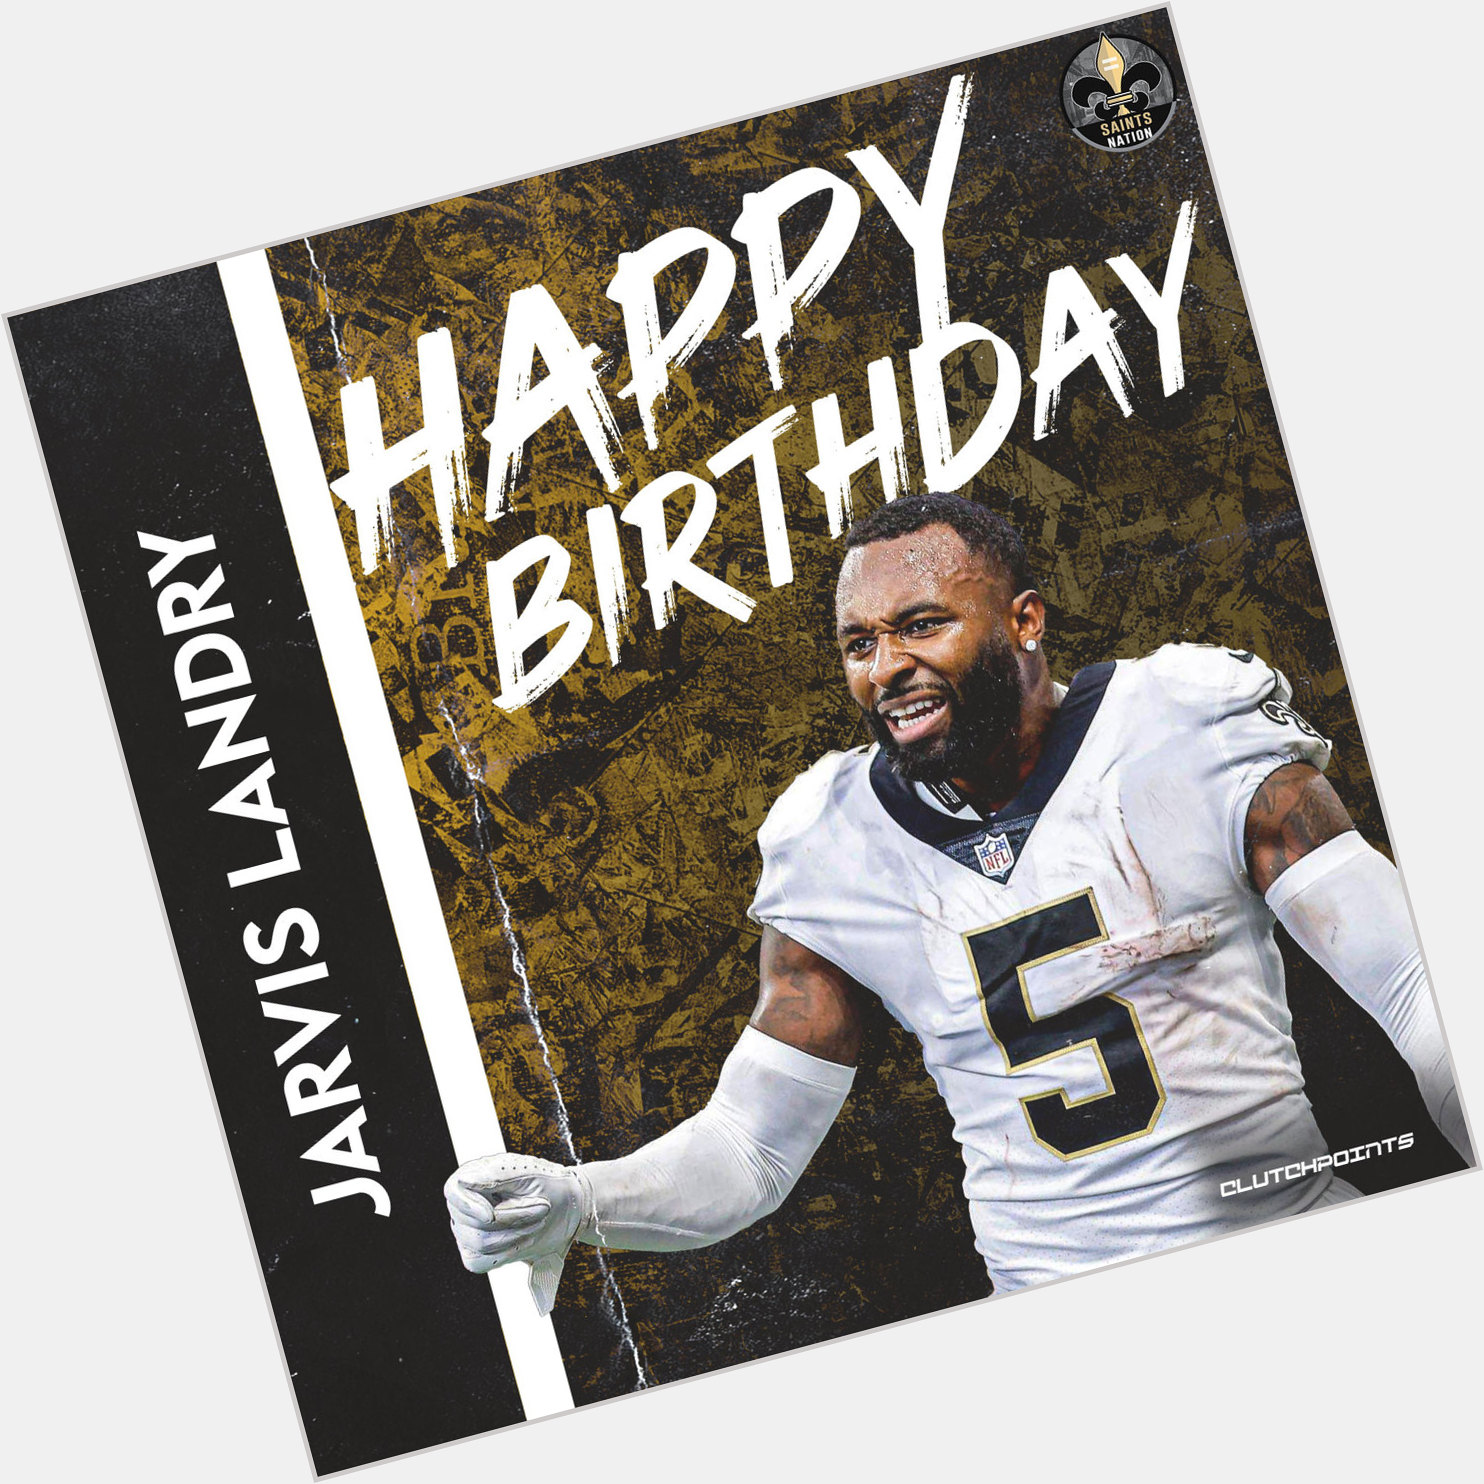 Saints Nation, join us in wishing Jarvis Landry a happy 30th birthday 